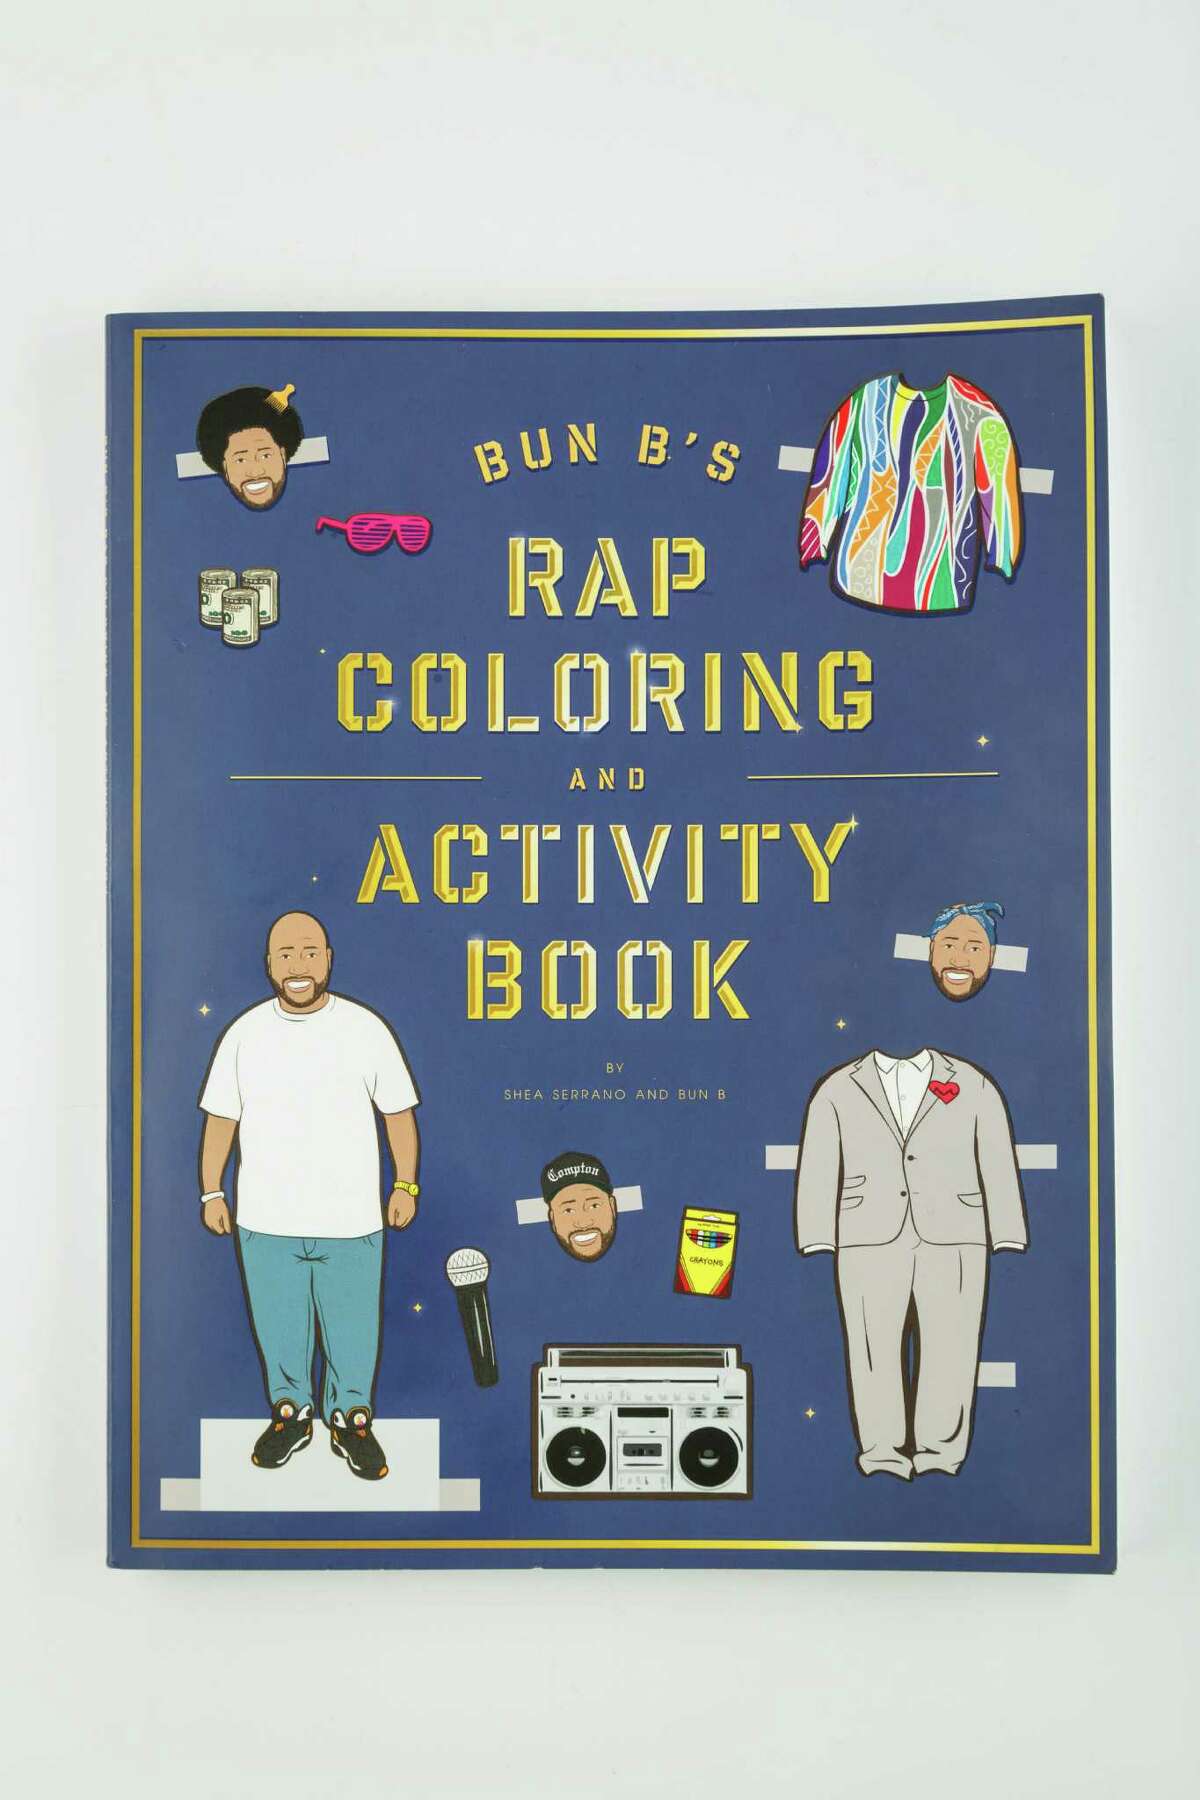 Houston Rapper Bun B lends his name, knowledge and his face to "Bun B's Rap Coloring and Activity Book," drawn by Shea Serrano